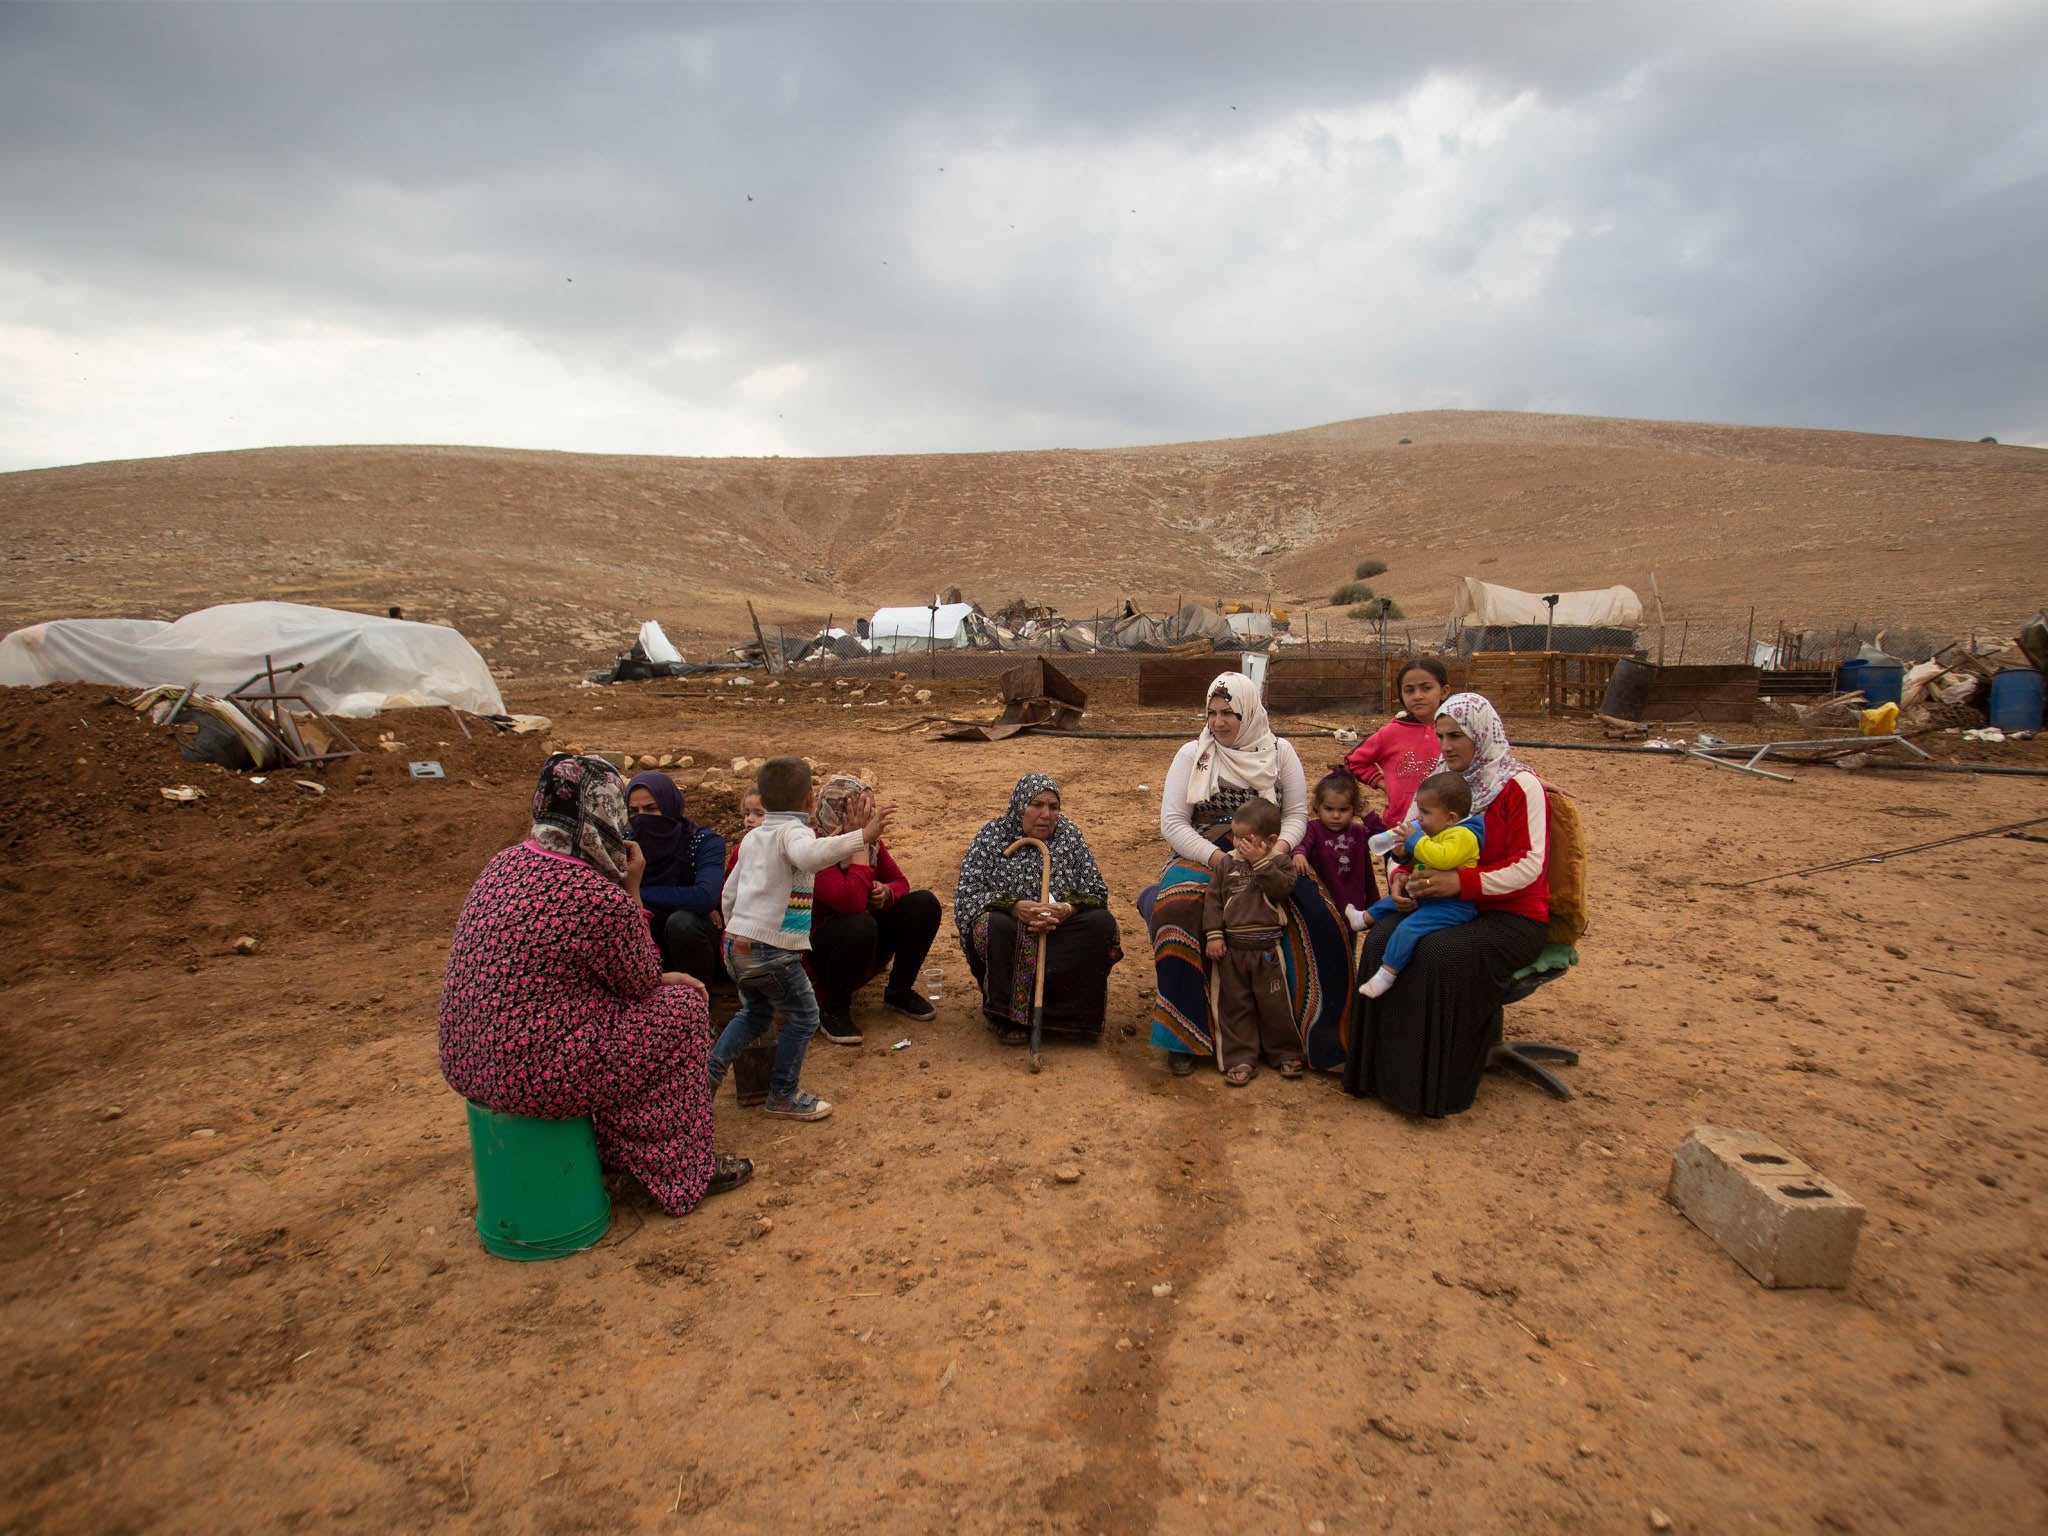 Palestinian women and children in Khirbet Humsu in Jordan Valley in the West Bank, 6 November, after Israeli bulldozers demolished their homes